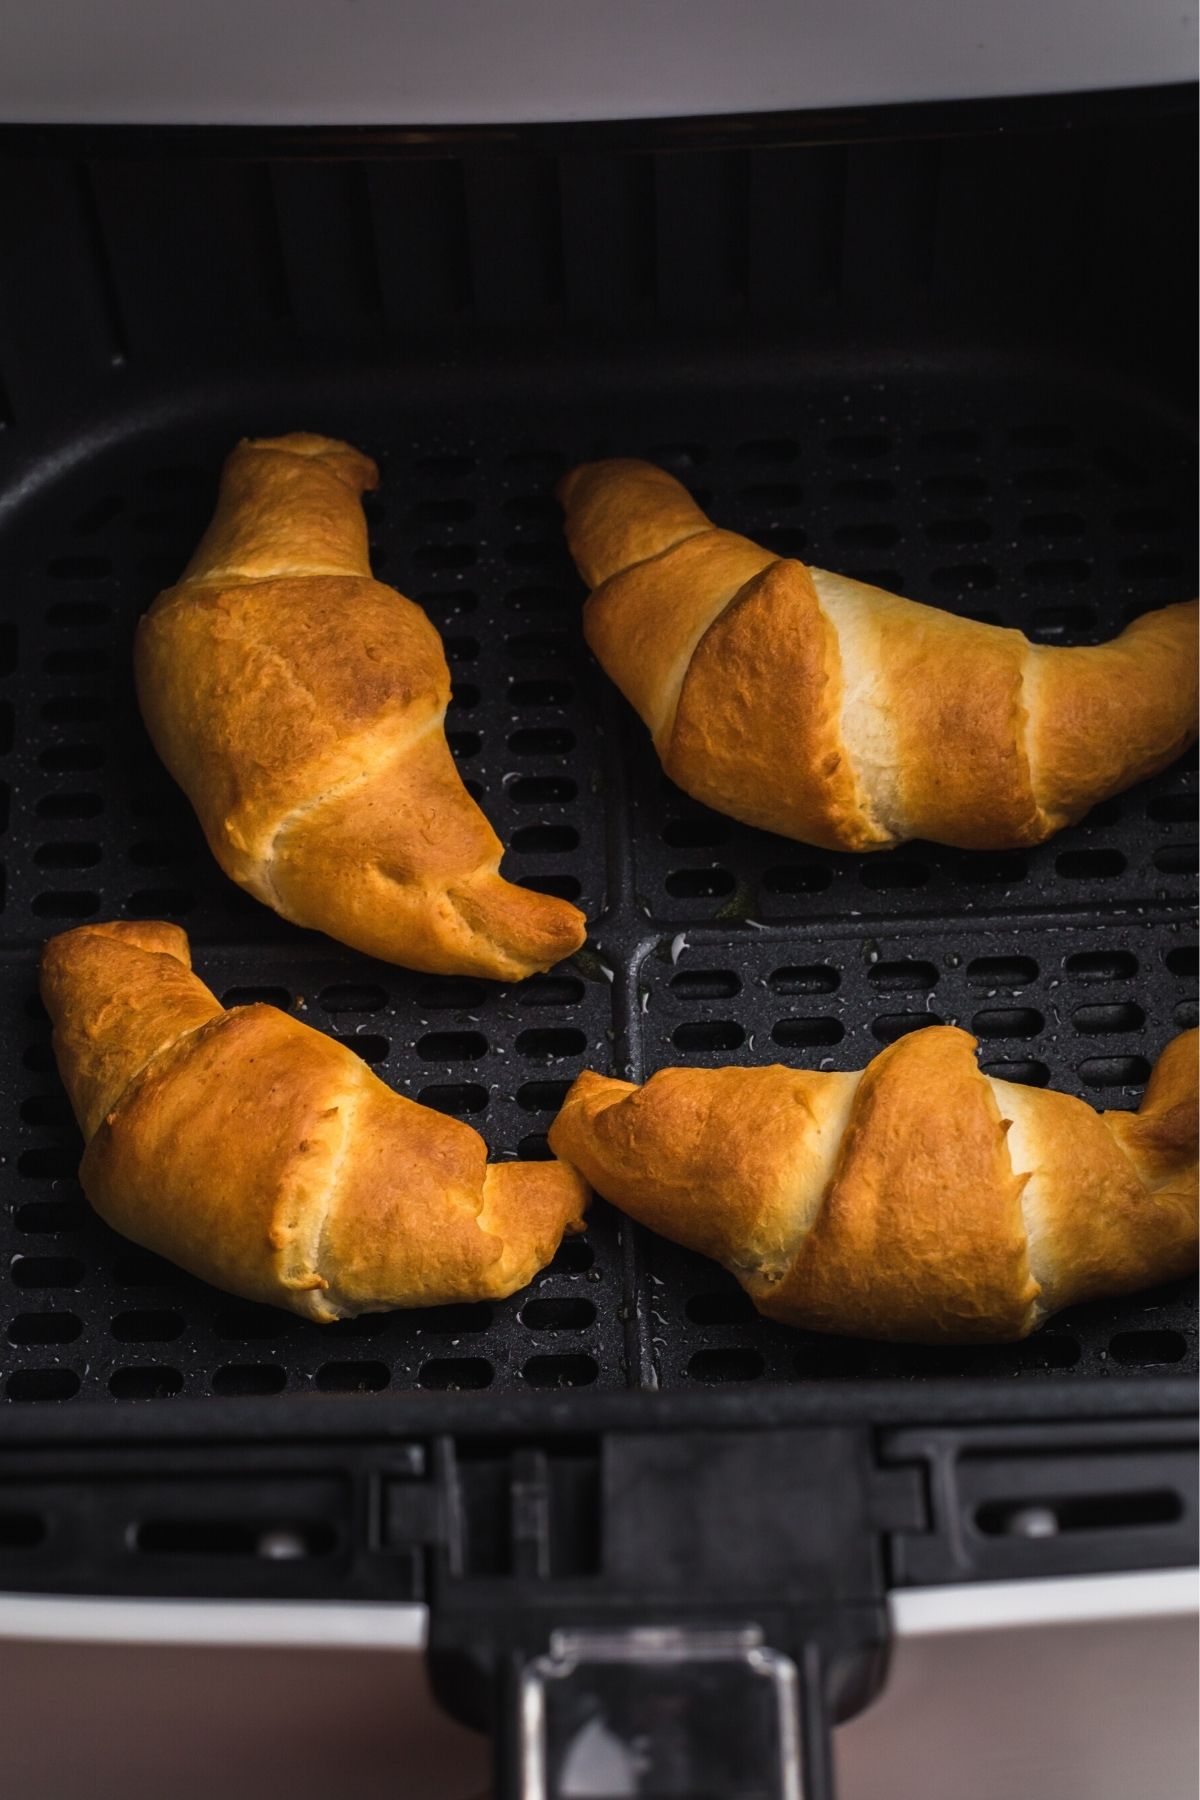 Golden croissants in the air fryer basket after being filled with chocolate and cooked